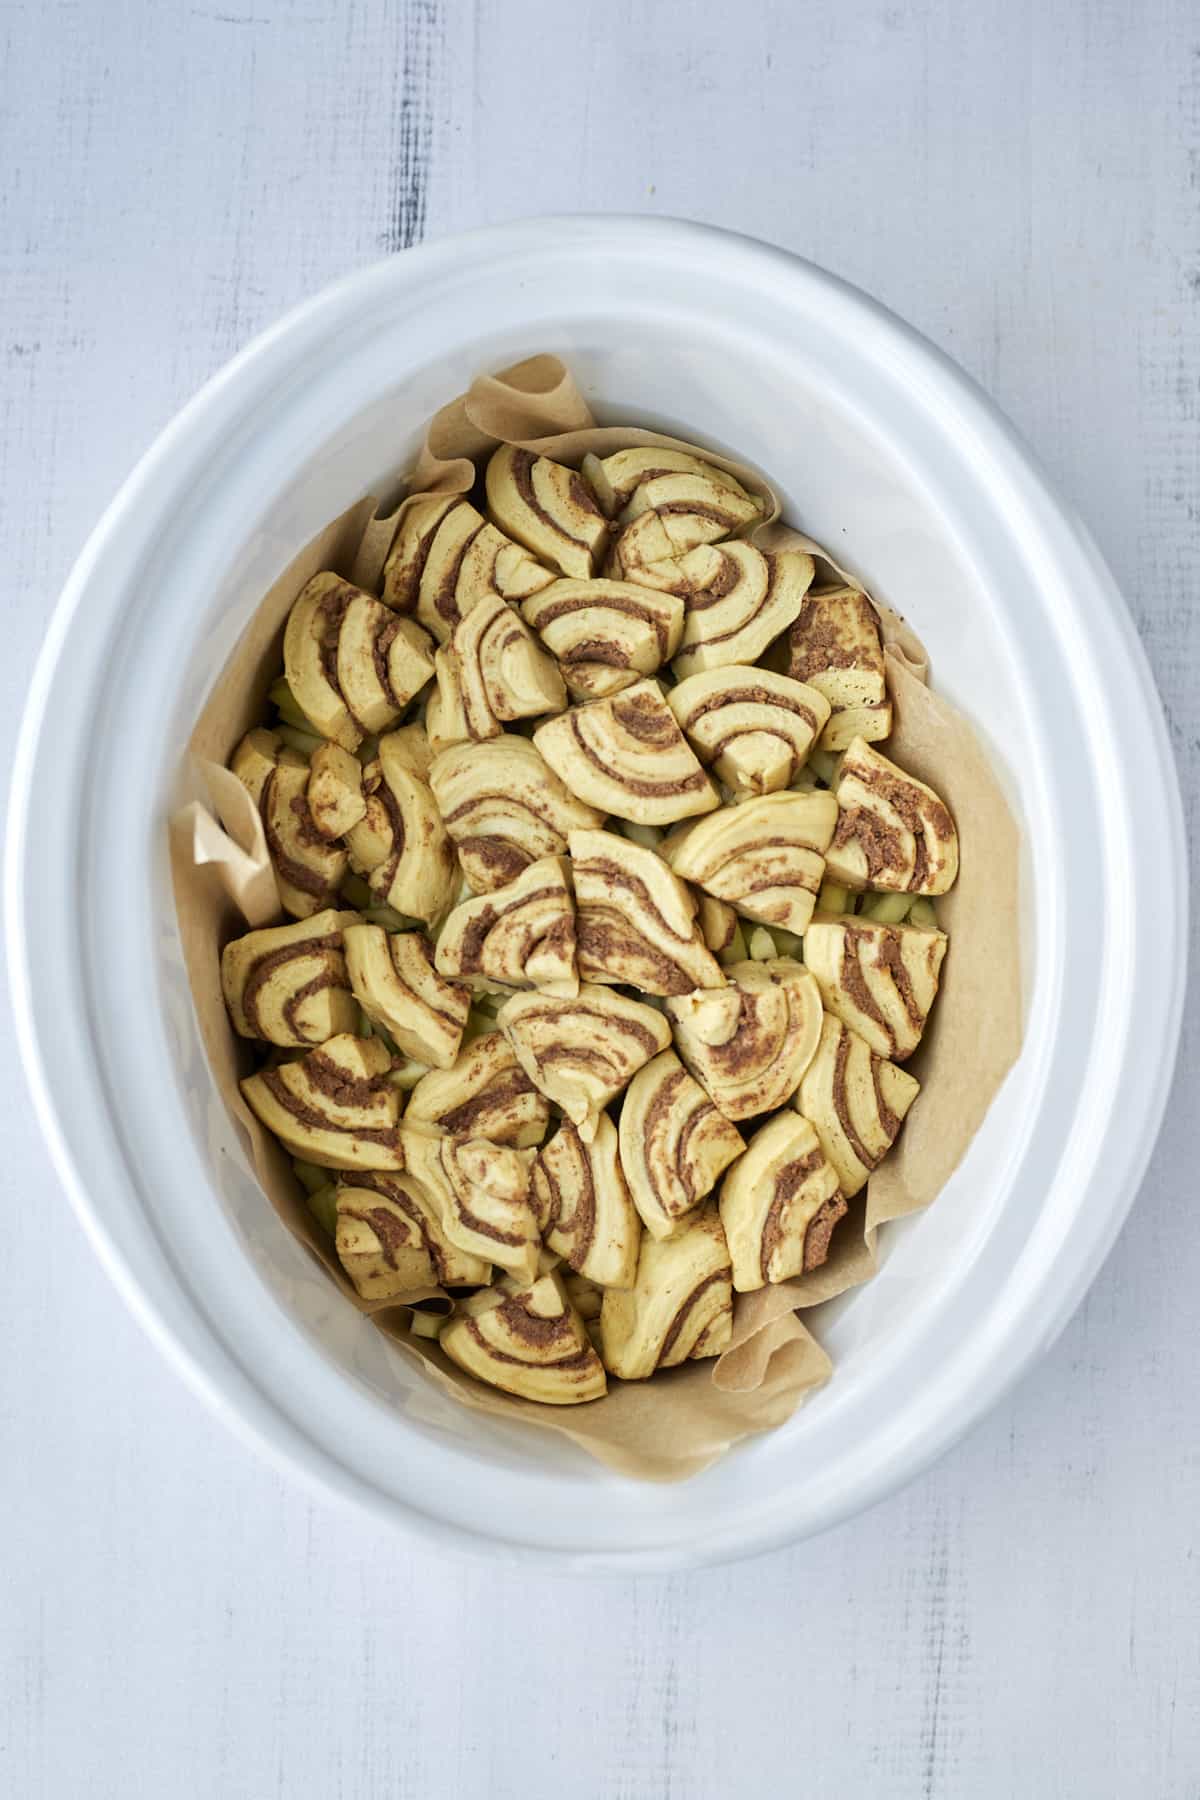 a slow cooker full of unbaked cinnamon roll pieces and apples